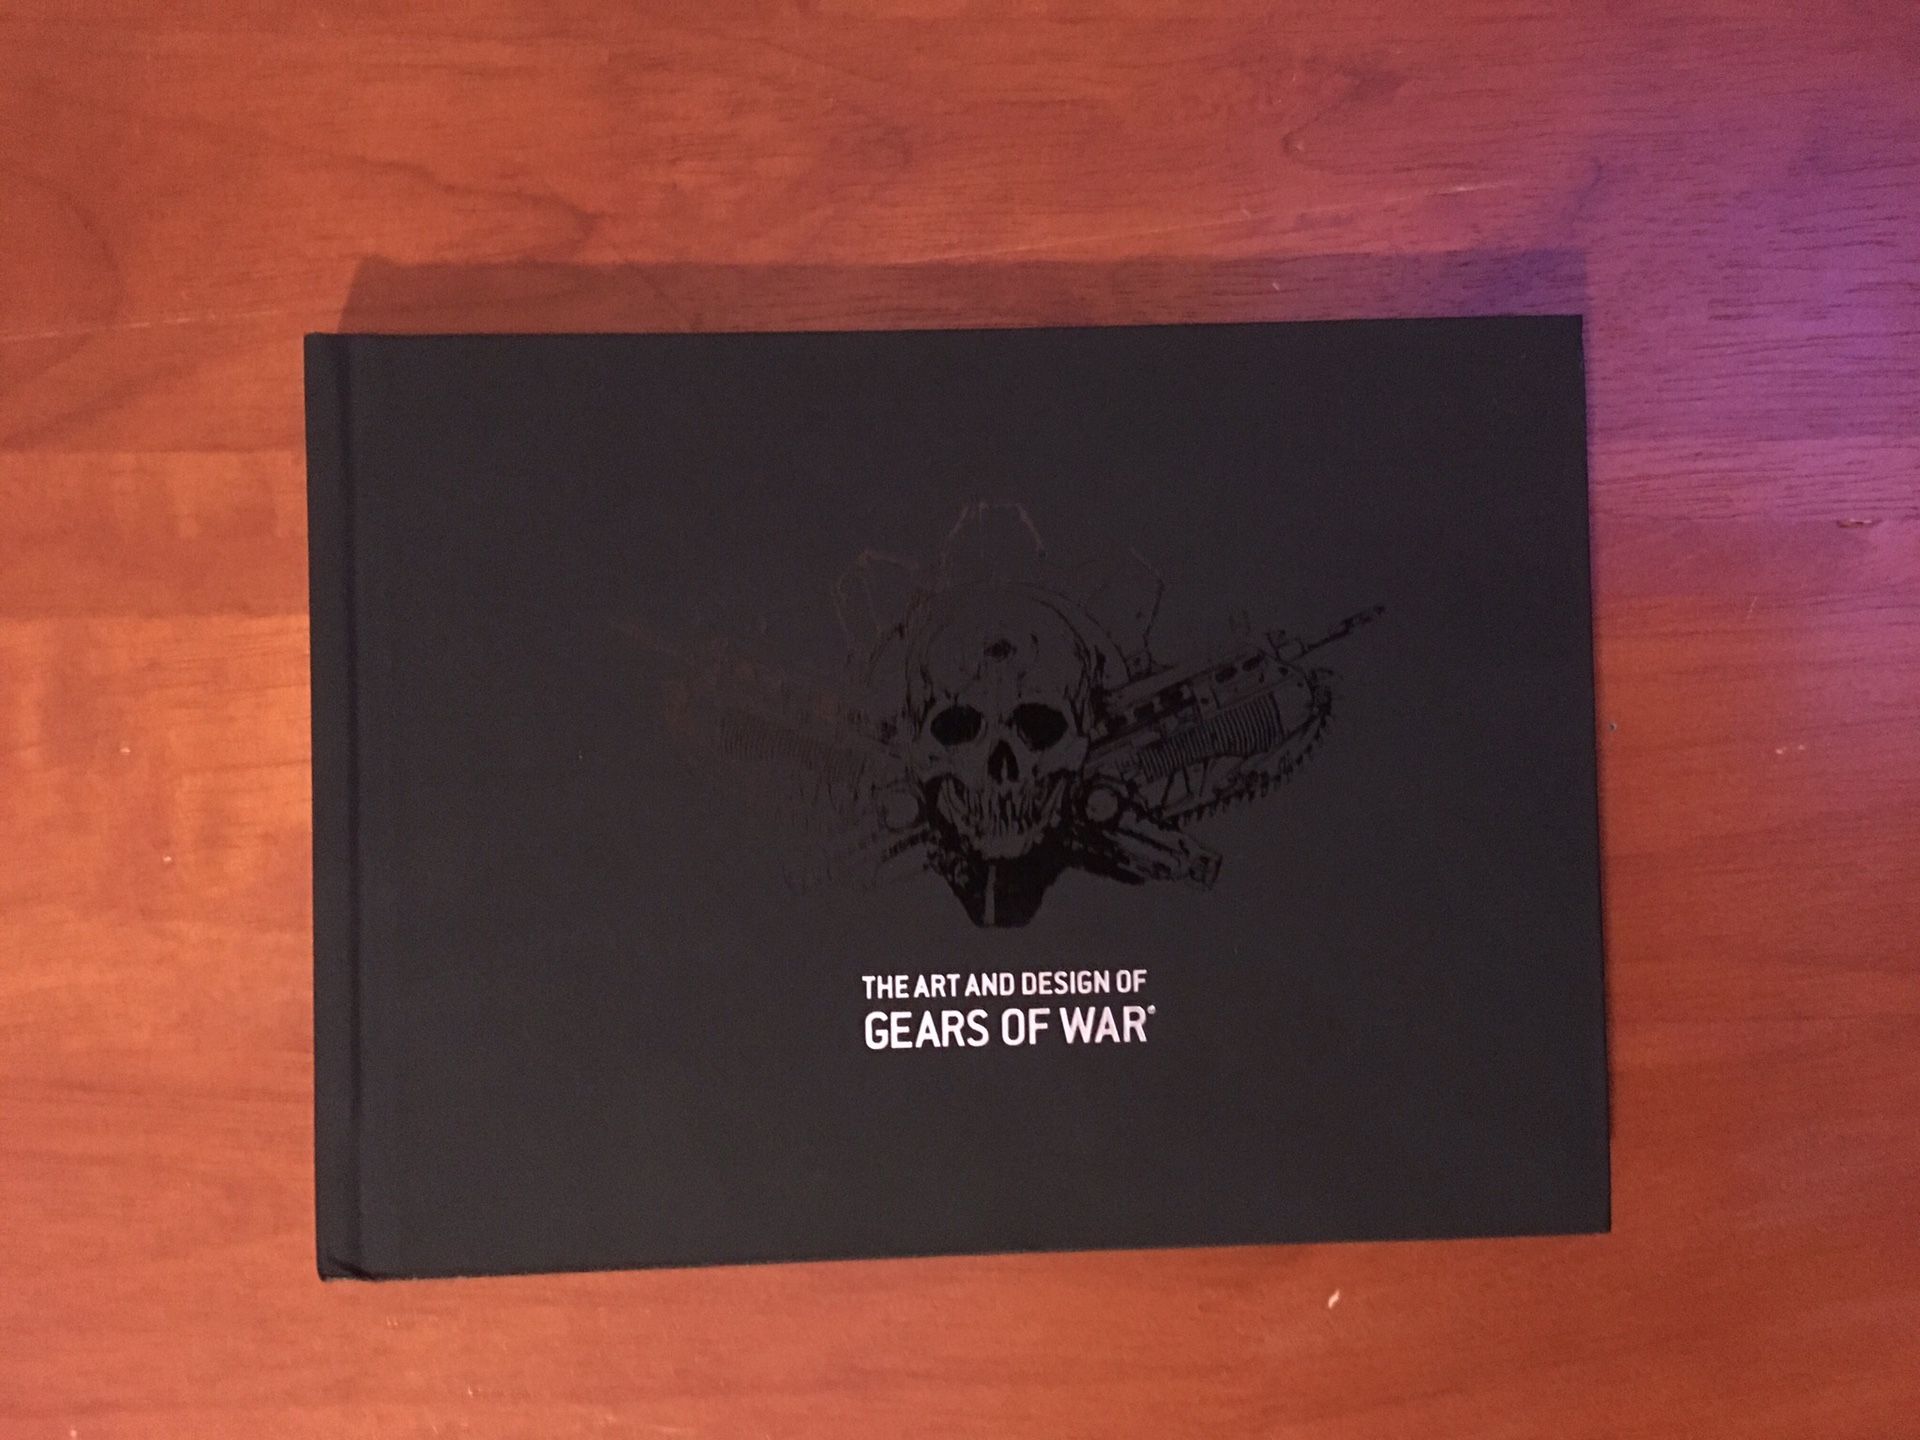 The Art and Design of Gears of War book